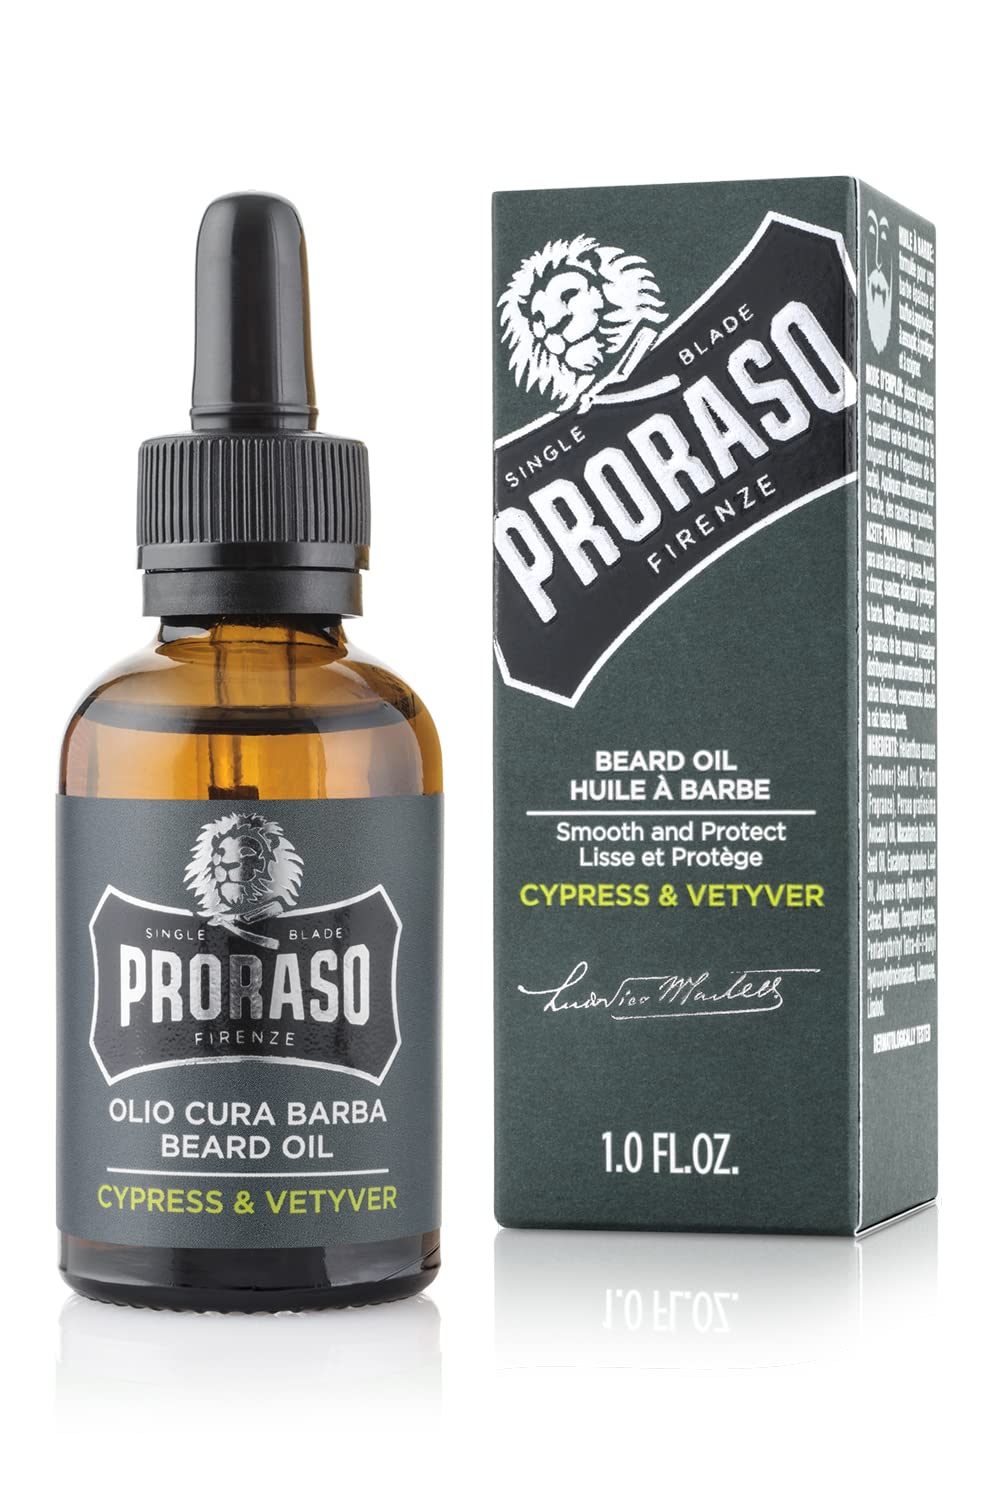 Proraso Beard Oil for Men to Tame, Smooth and Condition Beard Hair